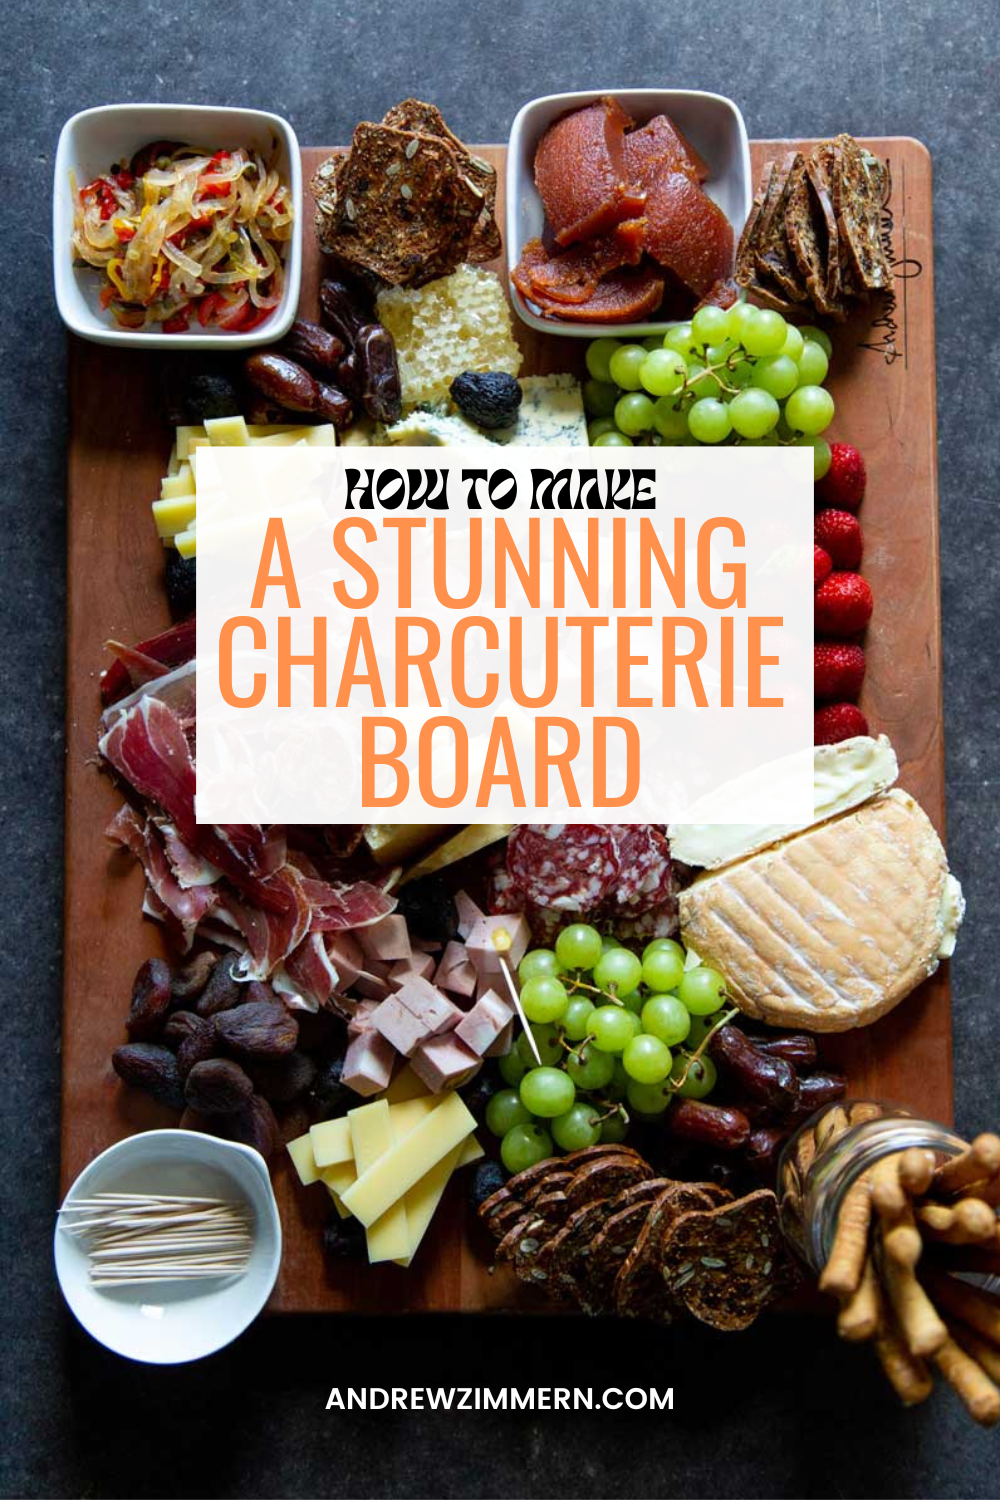 How to Make a Stunning Charcuterie Board - Andrew Zimmern